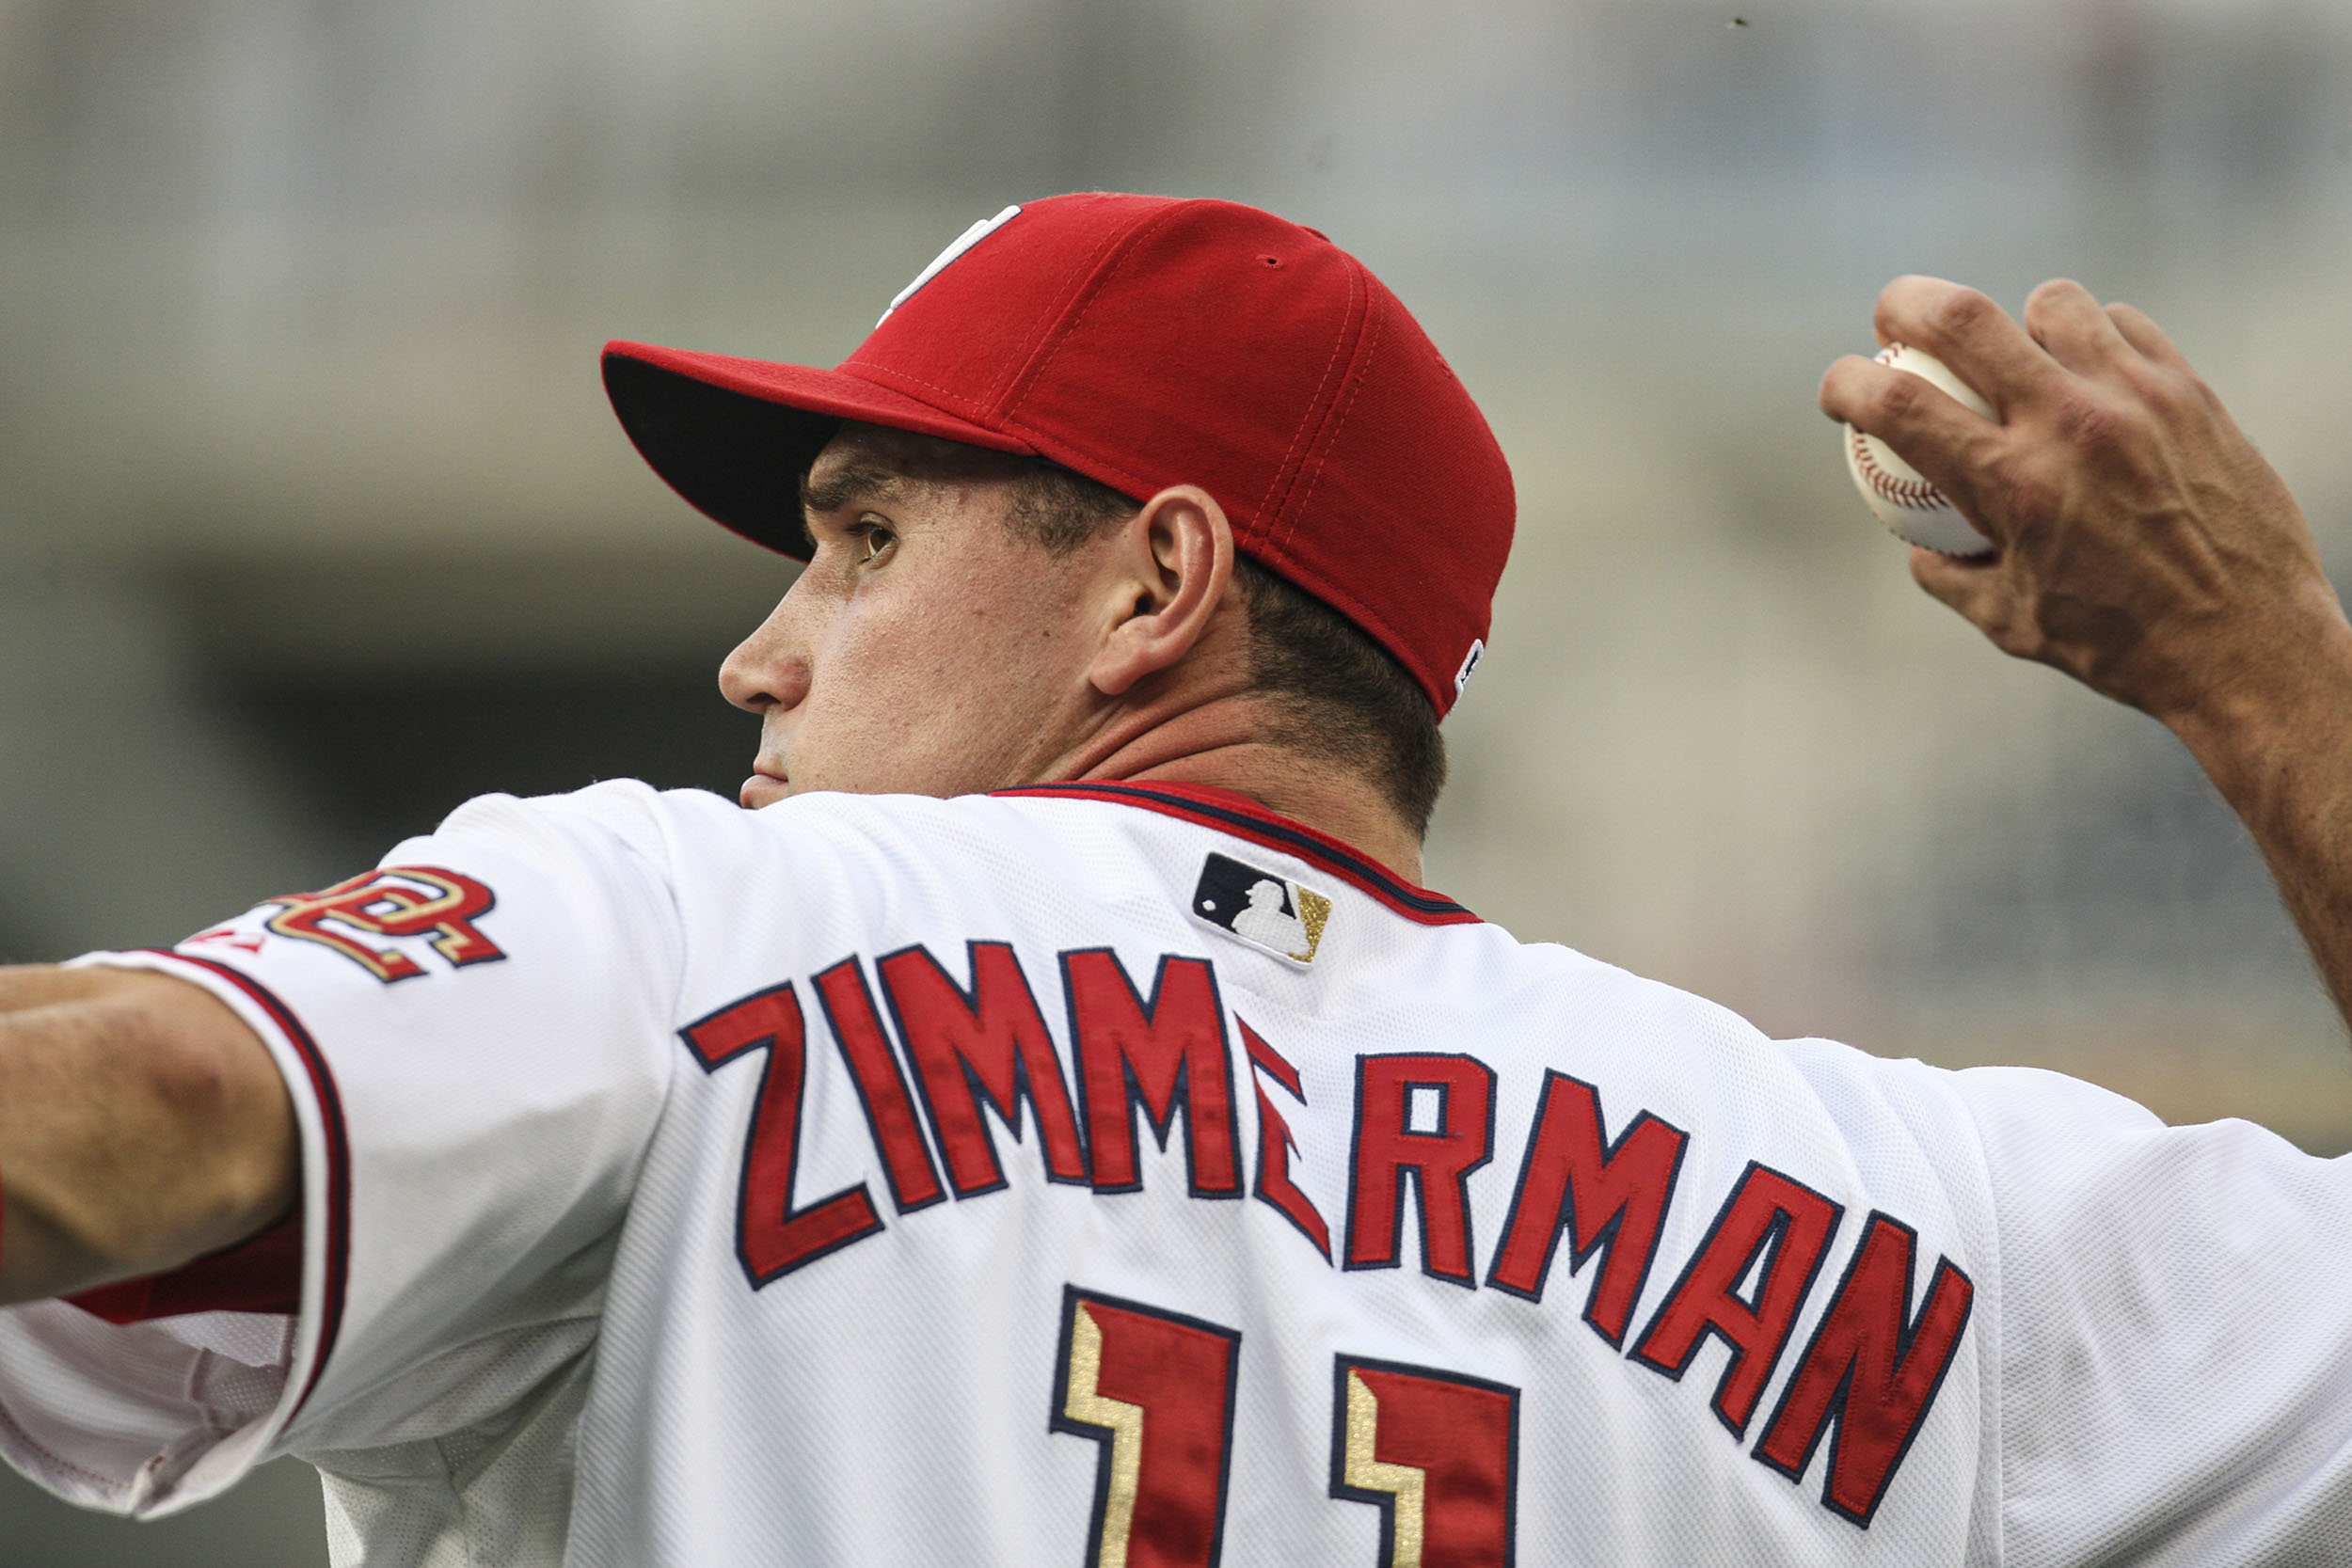 Ryan Zimmerman has cool gesture for Nationals fans ahead of jersey